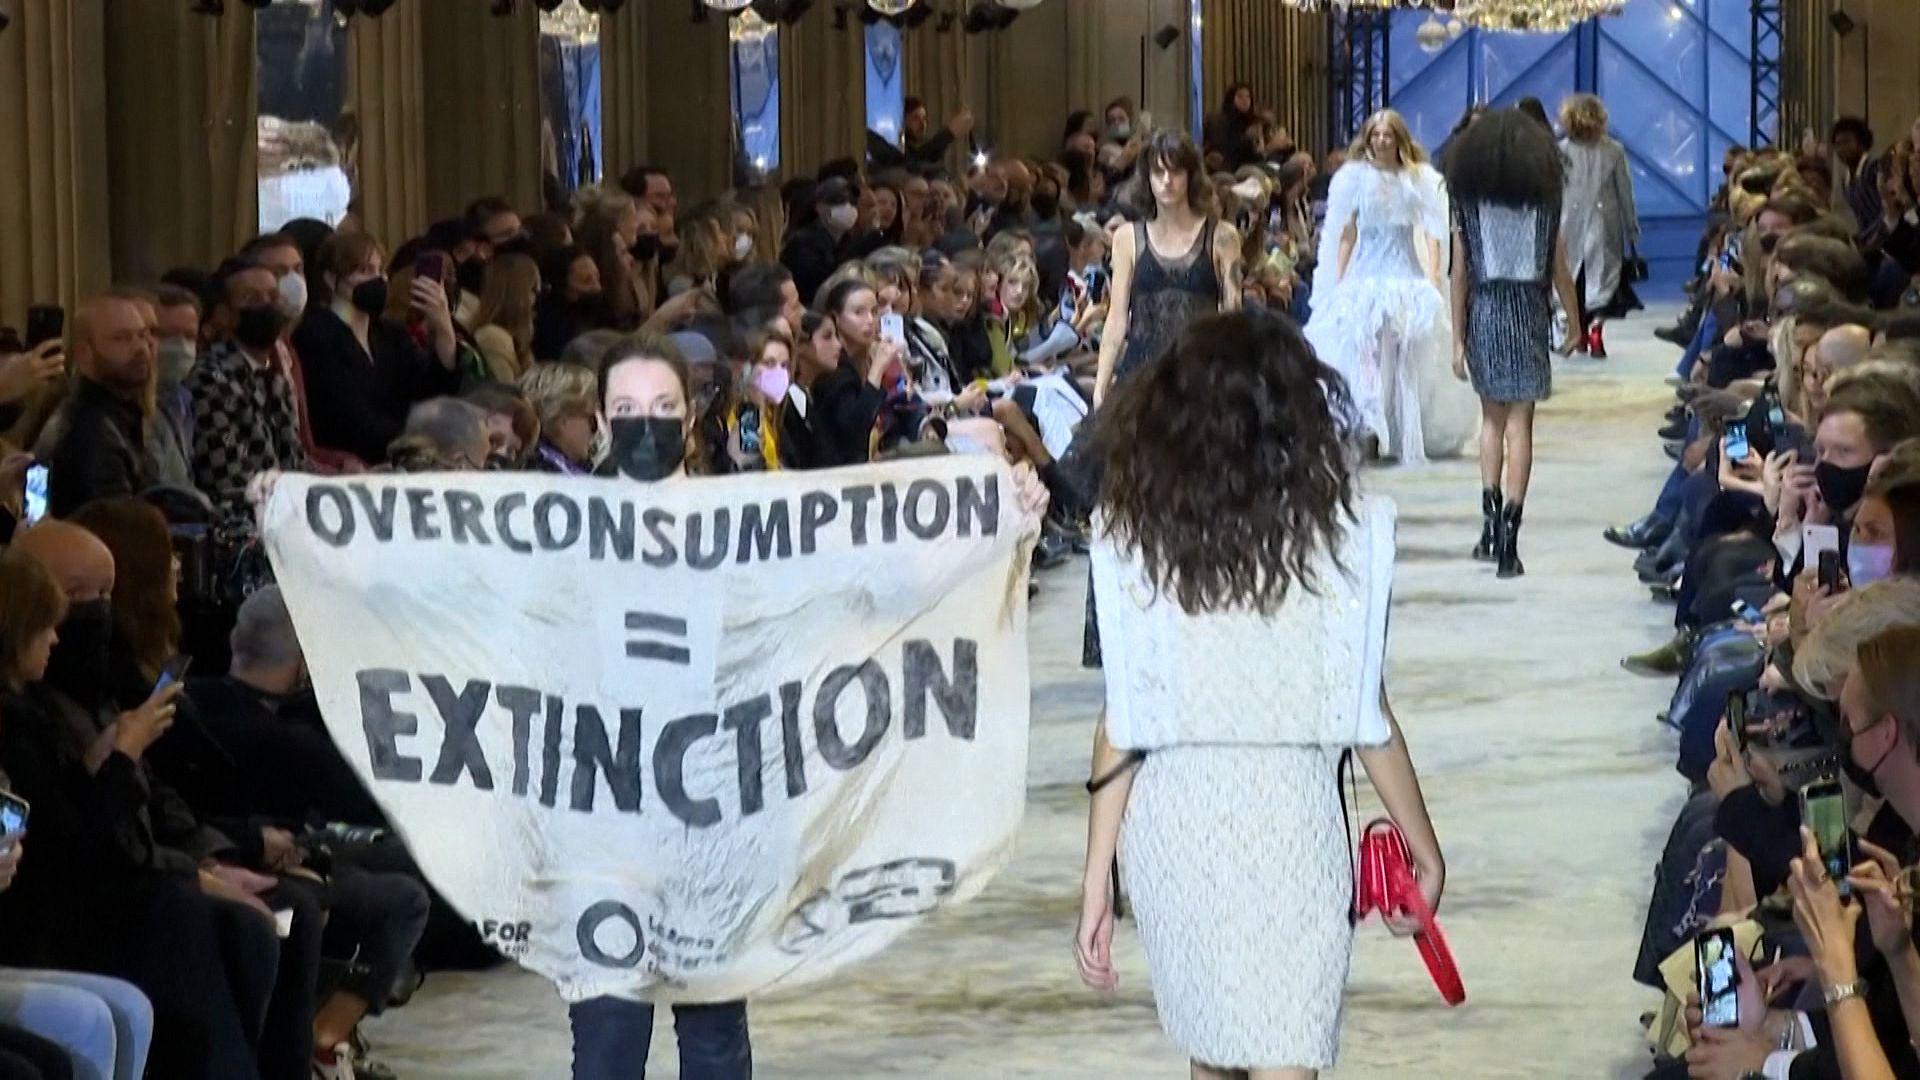 Everything You Need to Know About the Protest at the Louis Vuitton